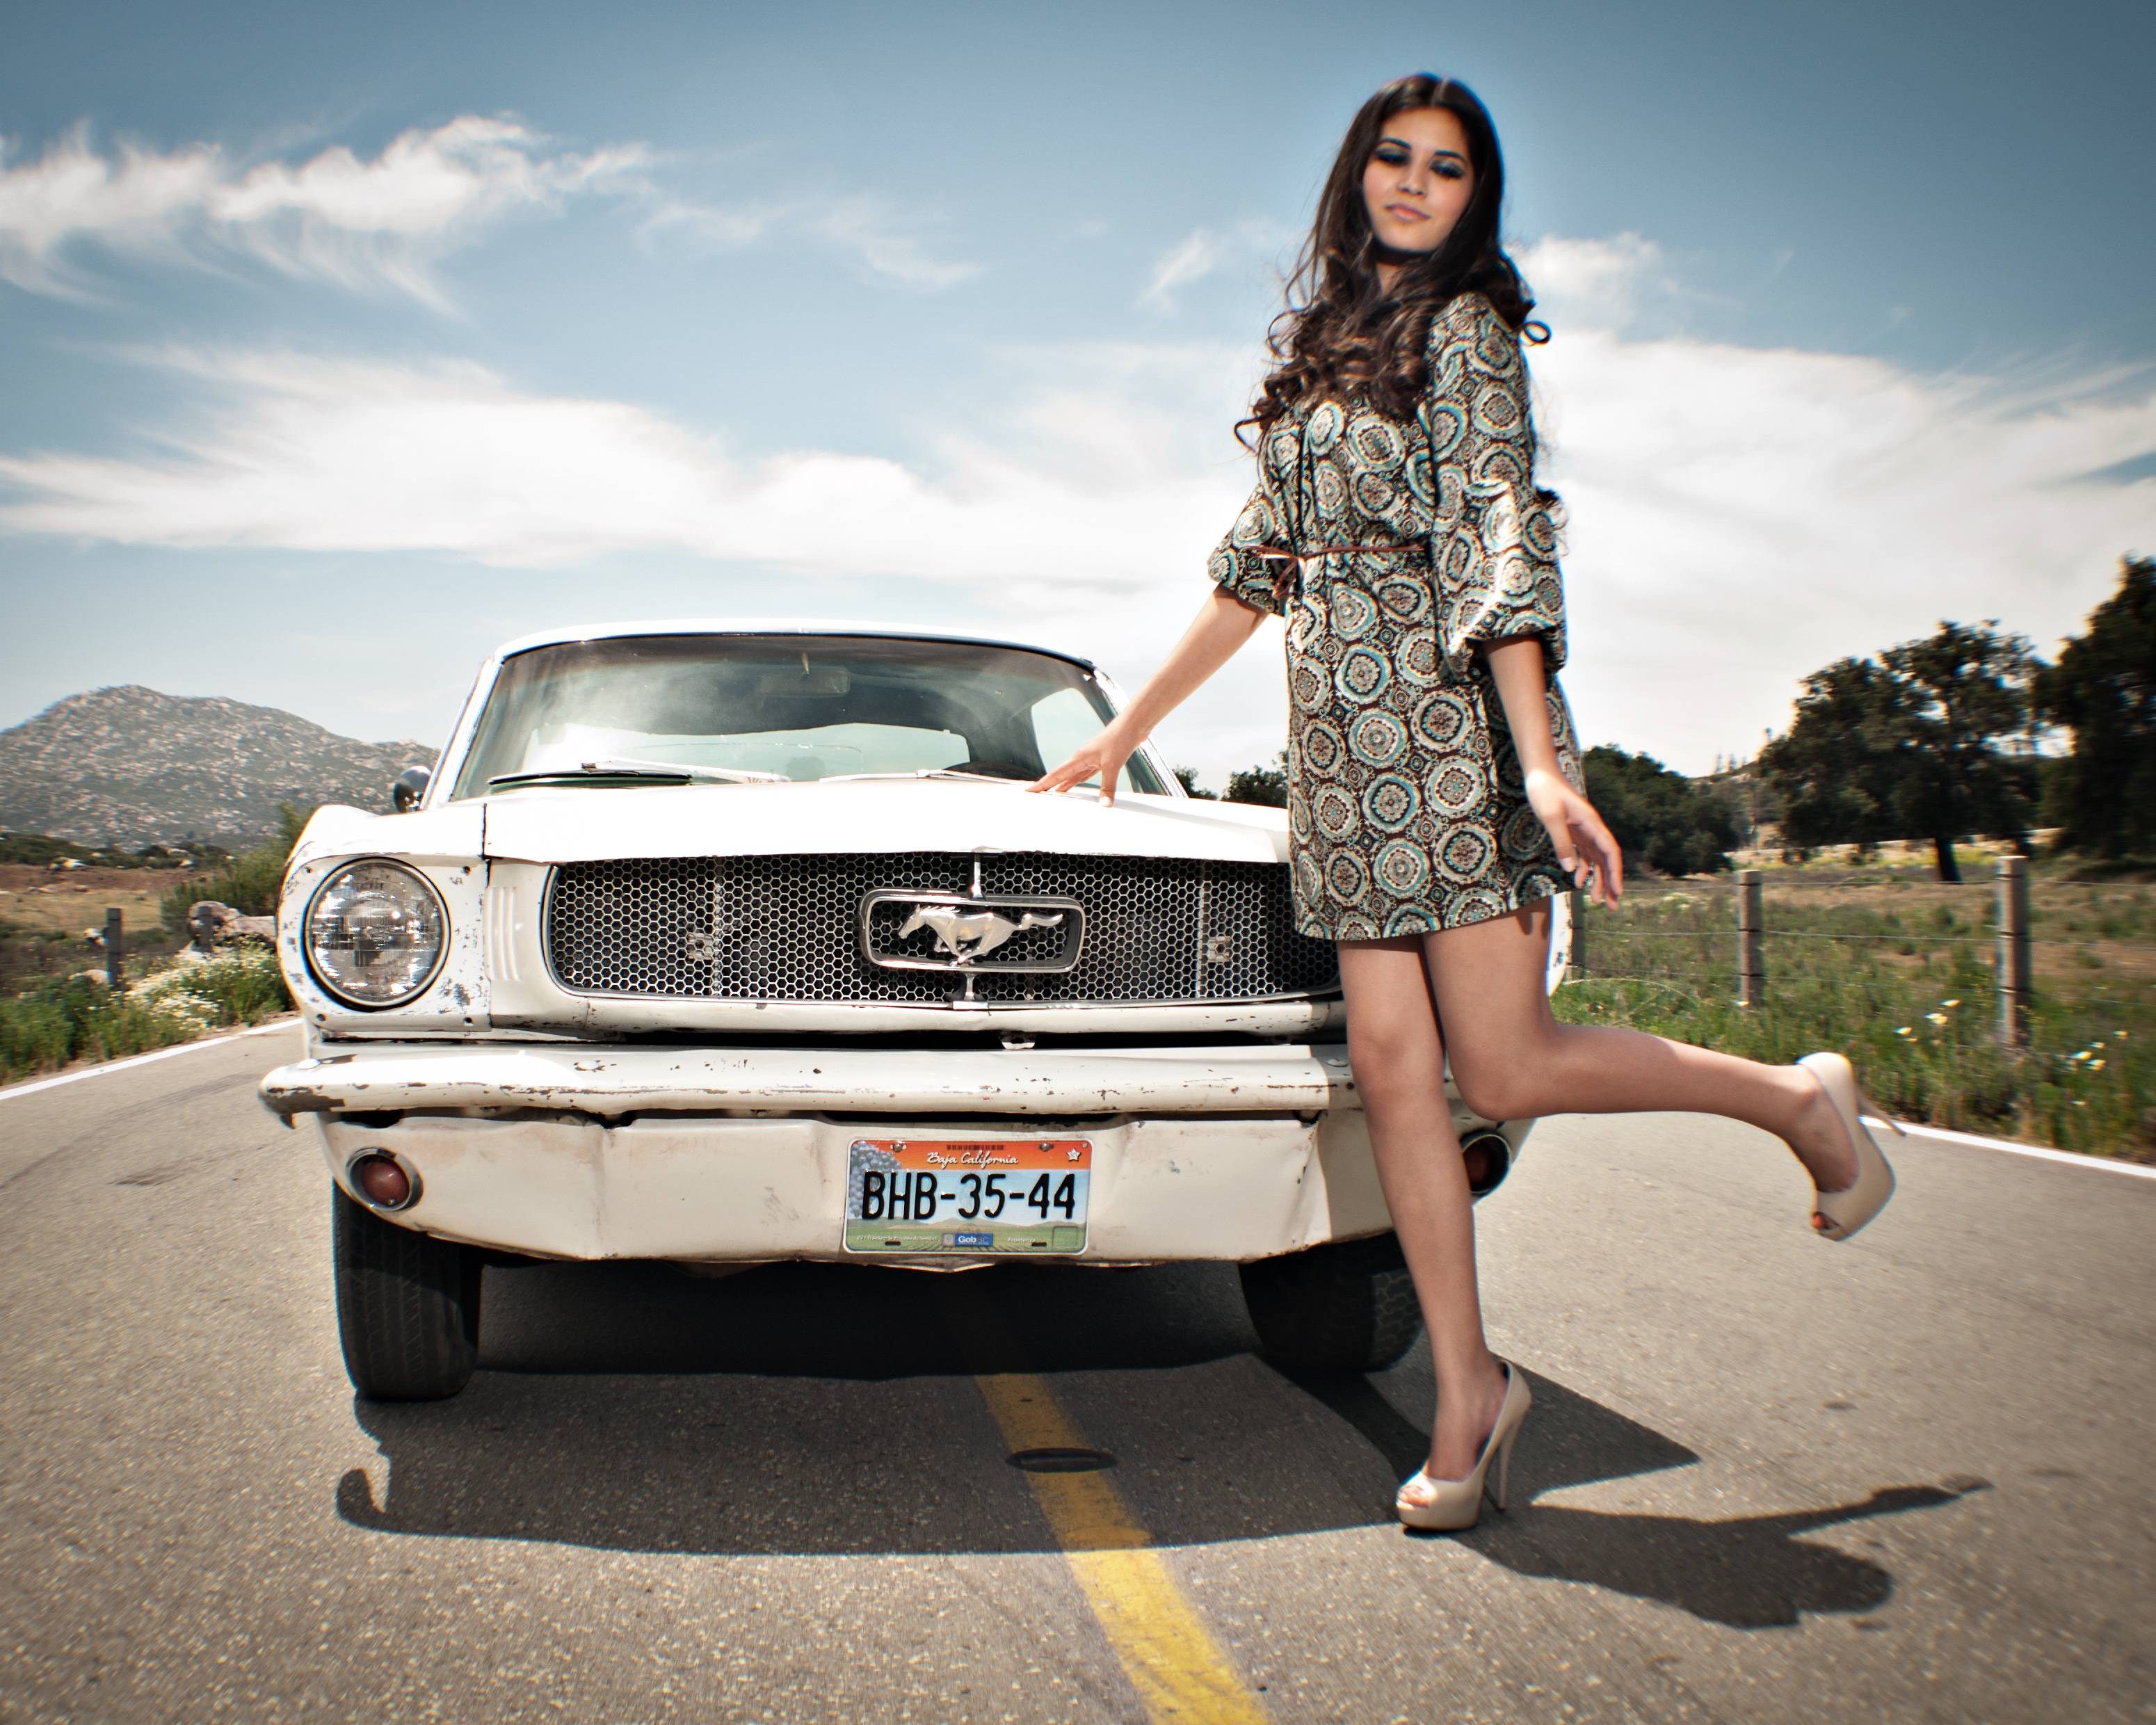 Girls And Muscle Cars